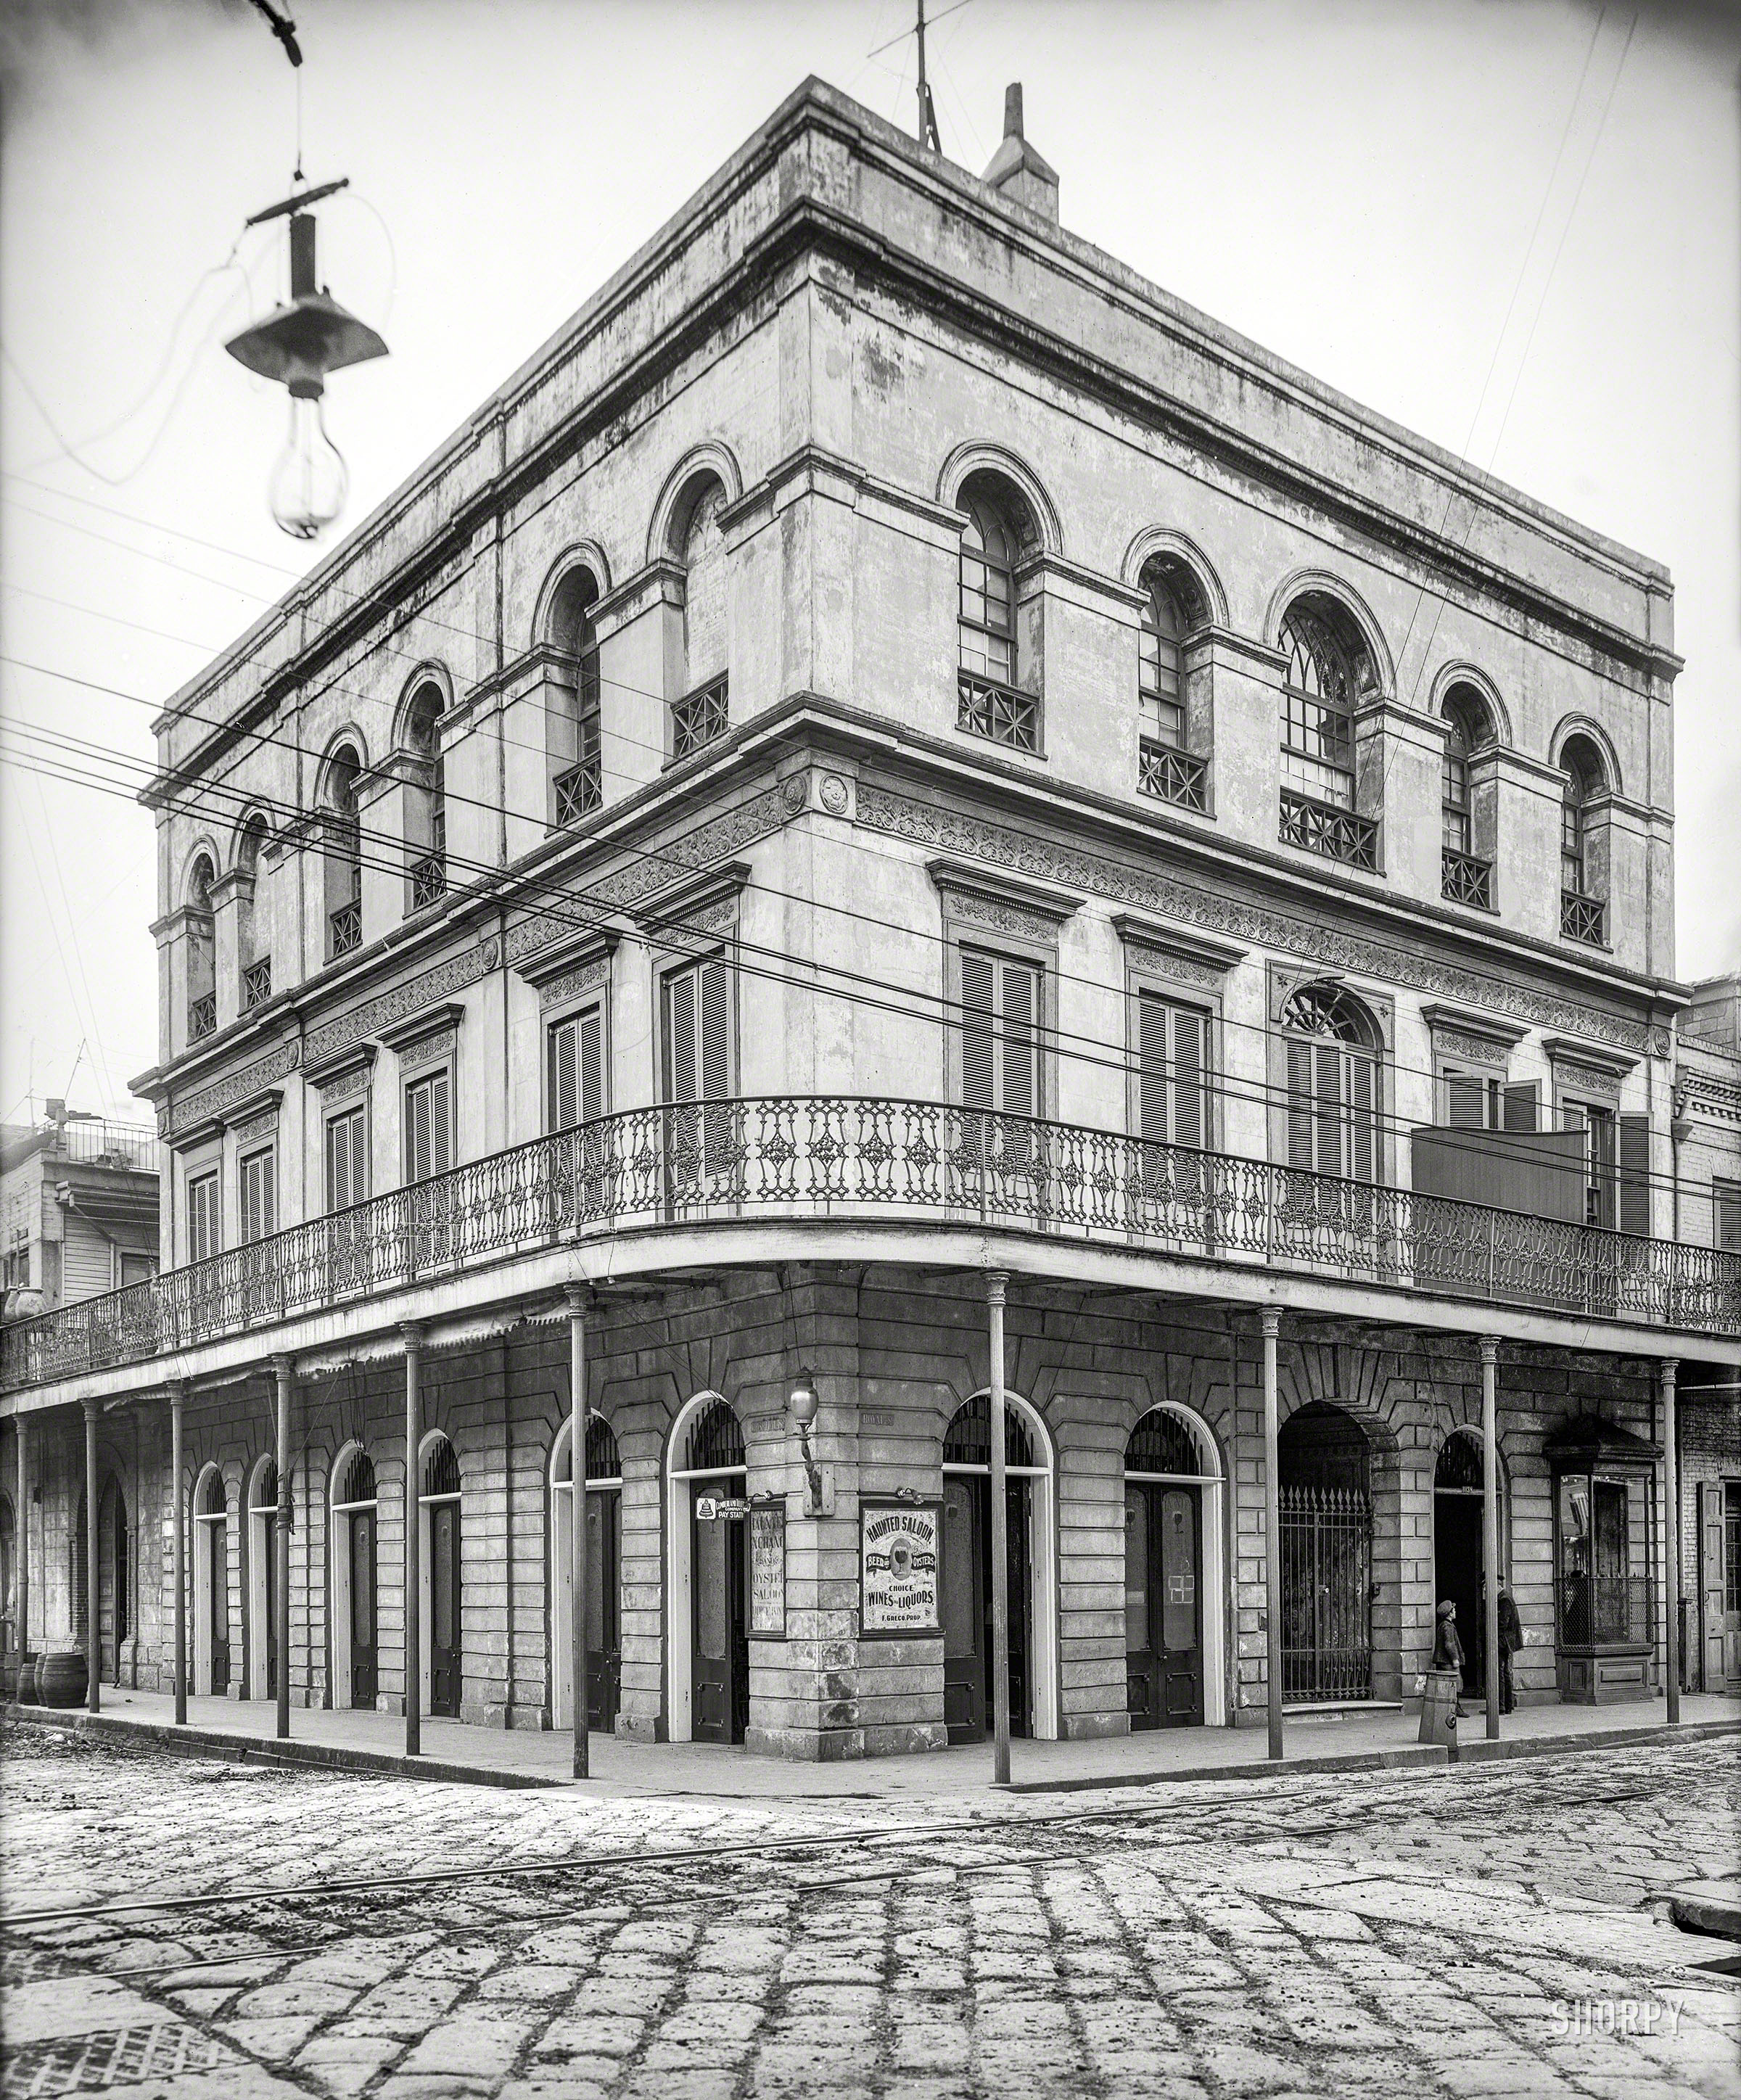 New Orleans circa 1906. "Haunted House (Warrington House), Royal and Hospital Streets." 8x10 inch glass negative, Detroit Publishing Company. View full size.